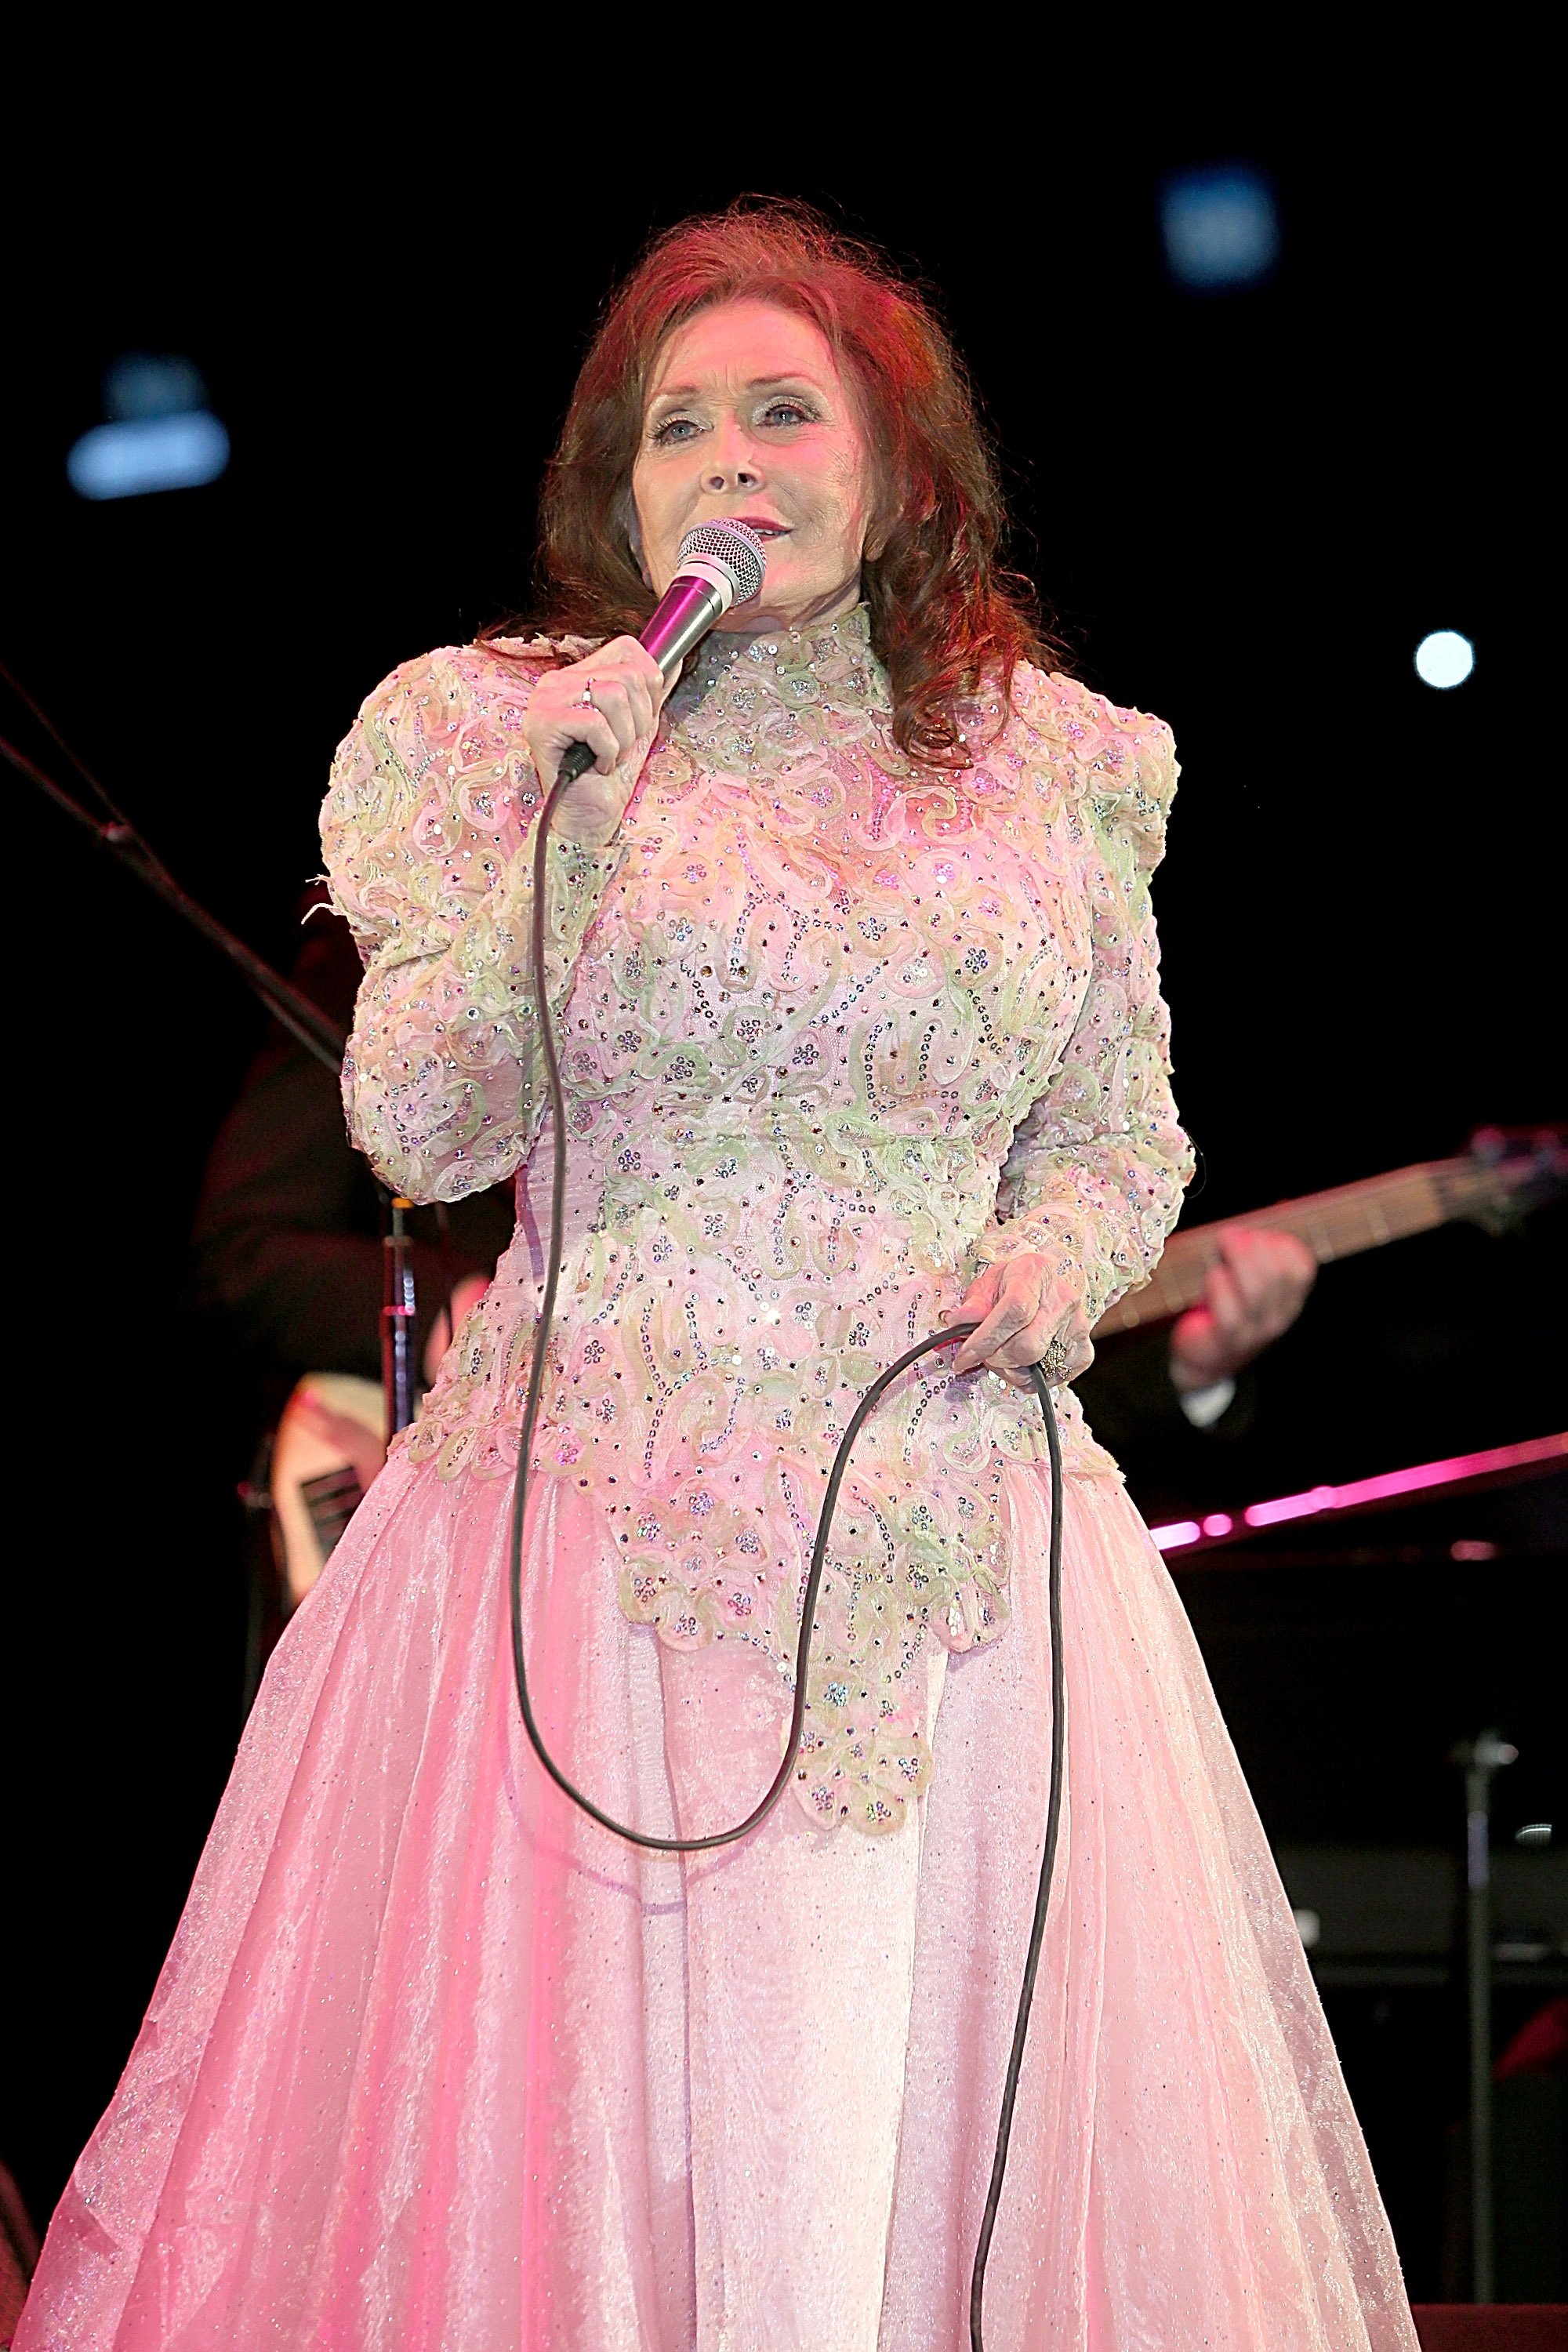 Loretta Lynn on stage during Rodeo Austin at the Travis County Expo Center in Austin, Texas | Photo: Gary Miller/FilmMagic via Getty Images